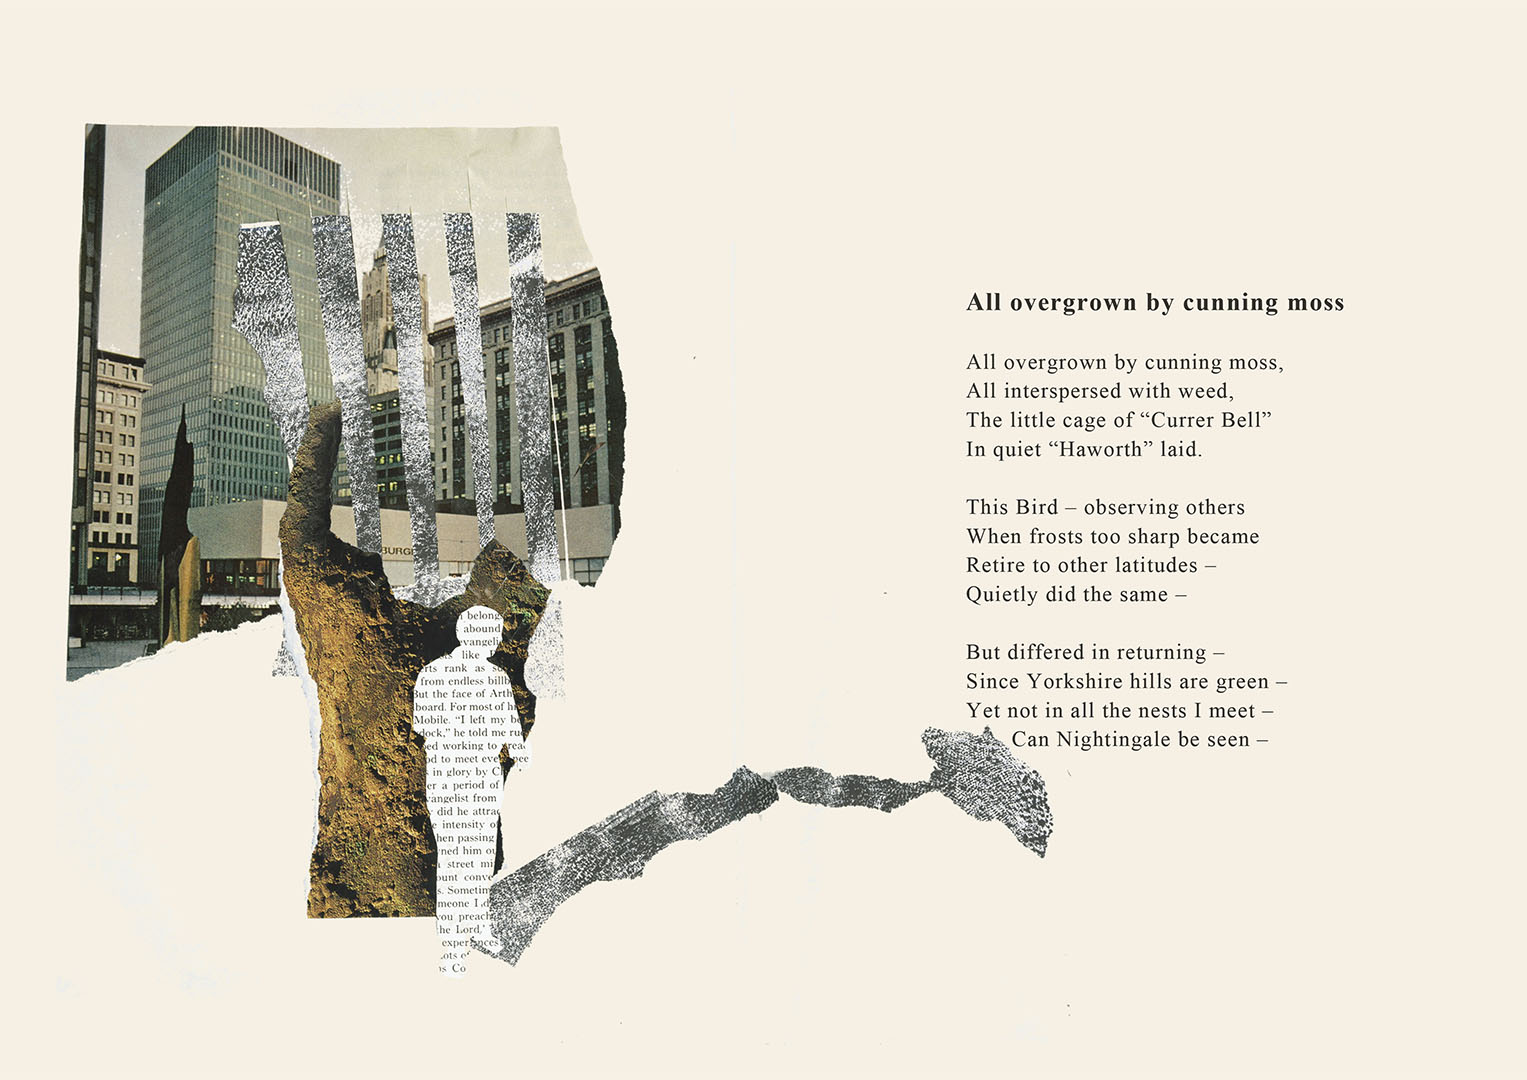 Cut-out of city, tree and person next to poem